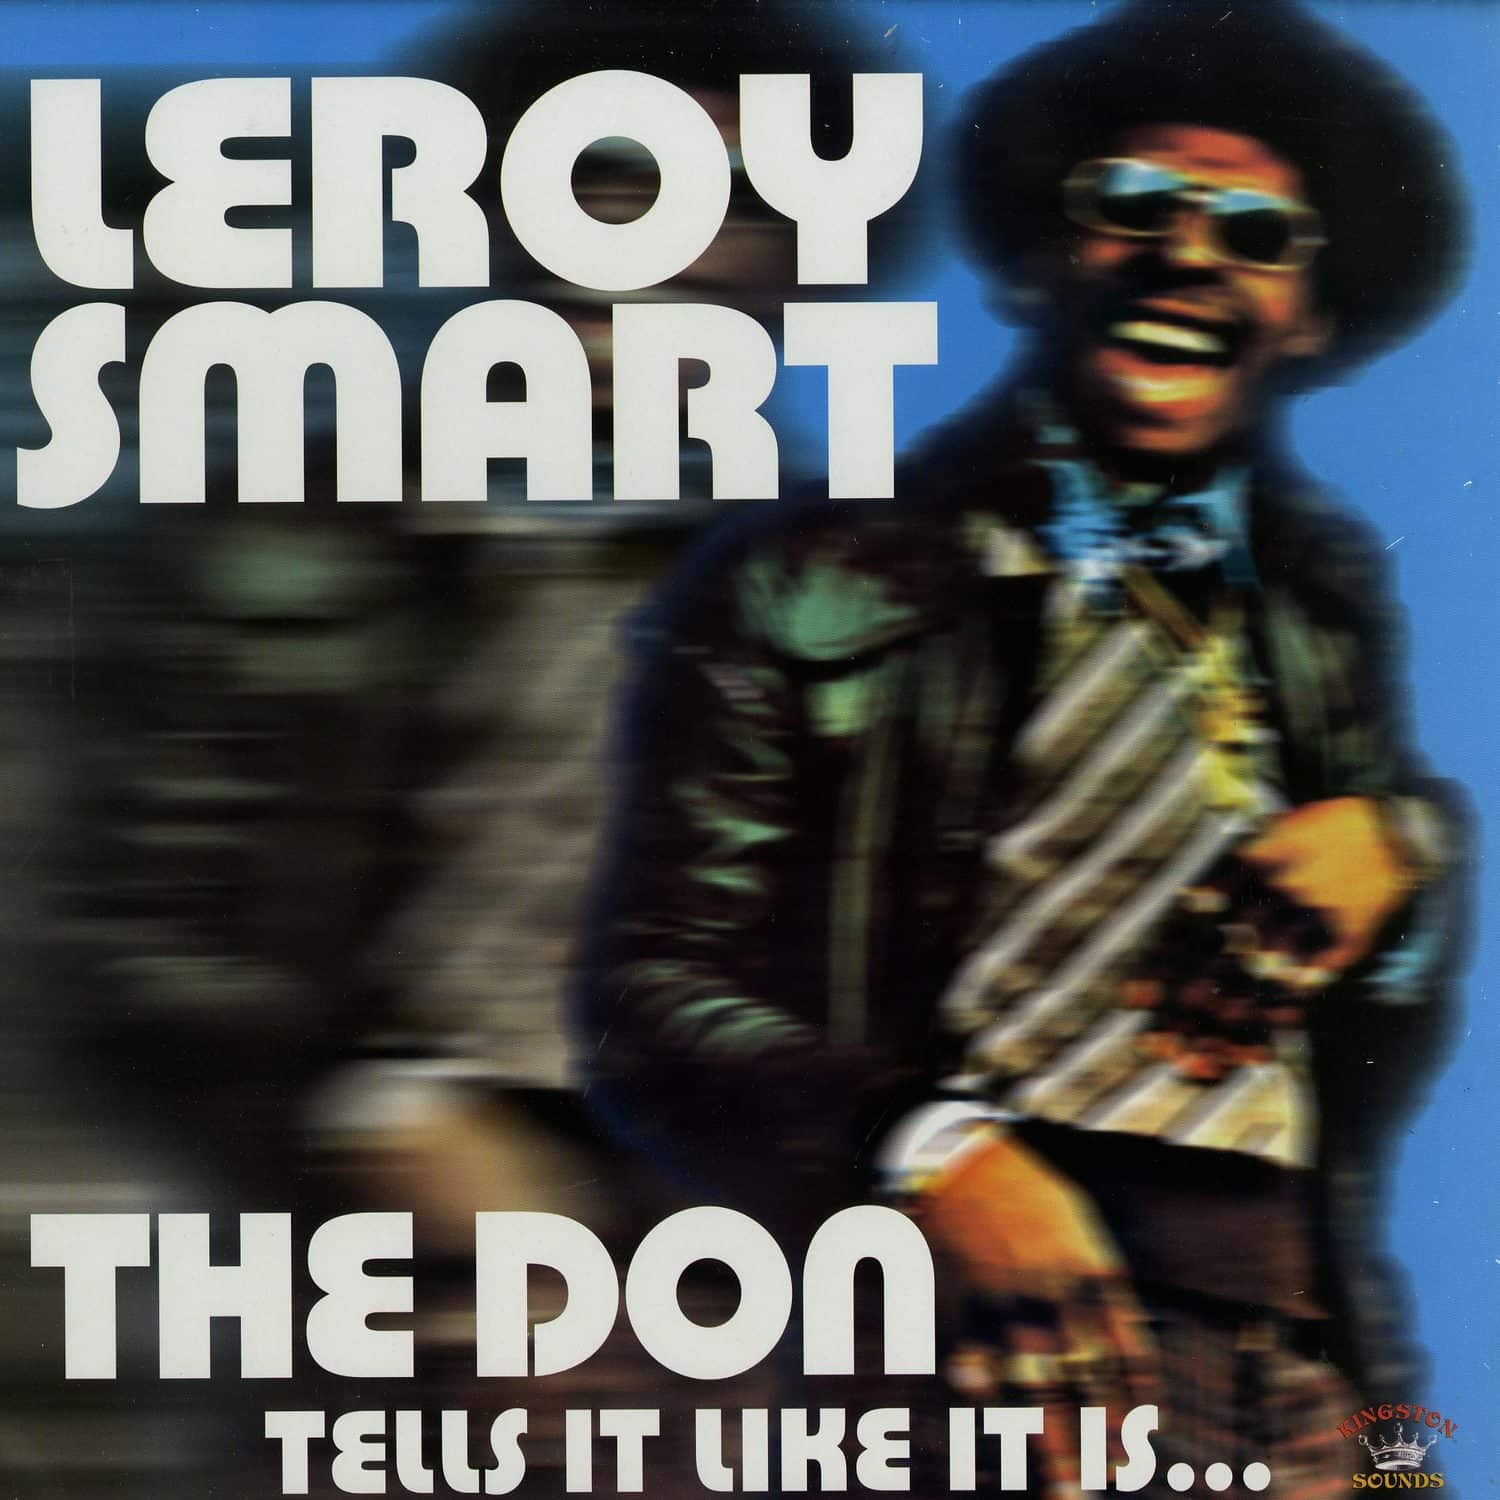 Leroy Smart - THE DON TELLS IT LIKES IT IS 